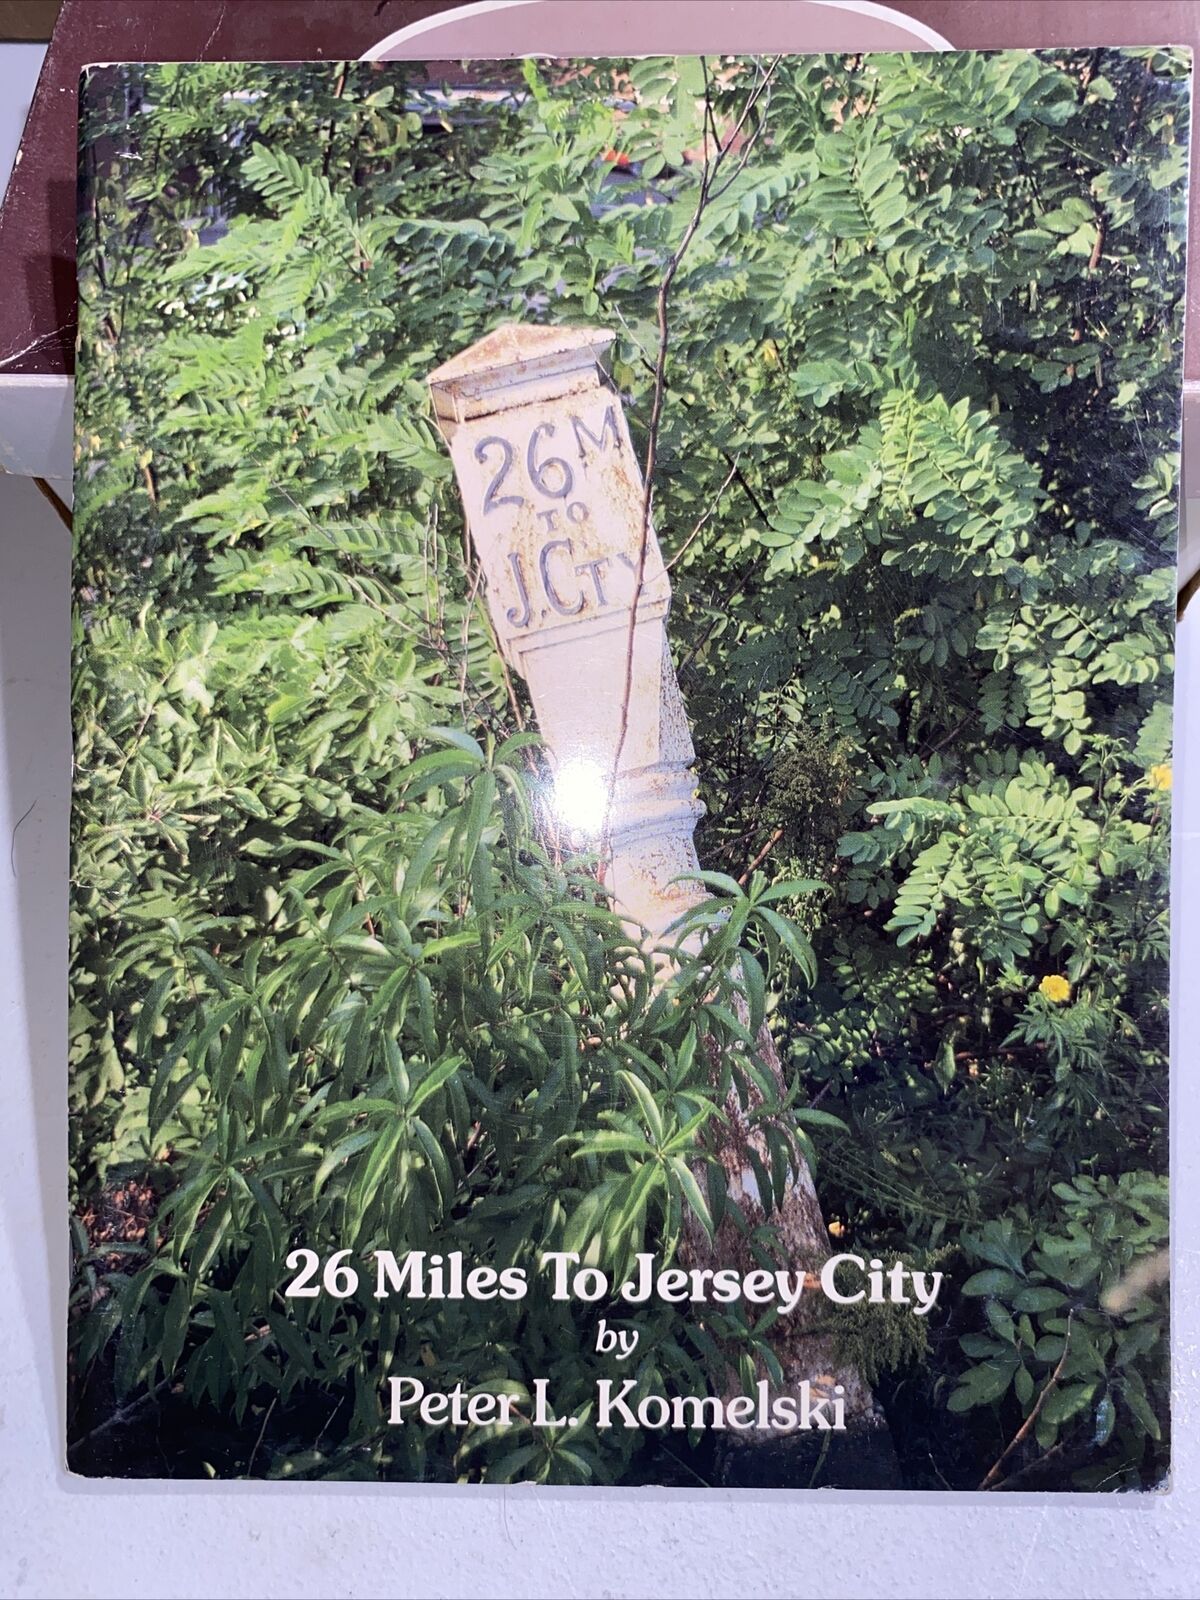 26 MILES TO JERSEY CITY JC CNJ JERSETY CENTRAL 